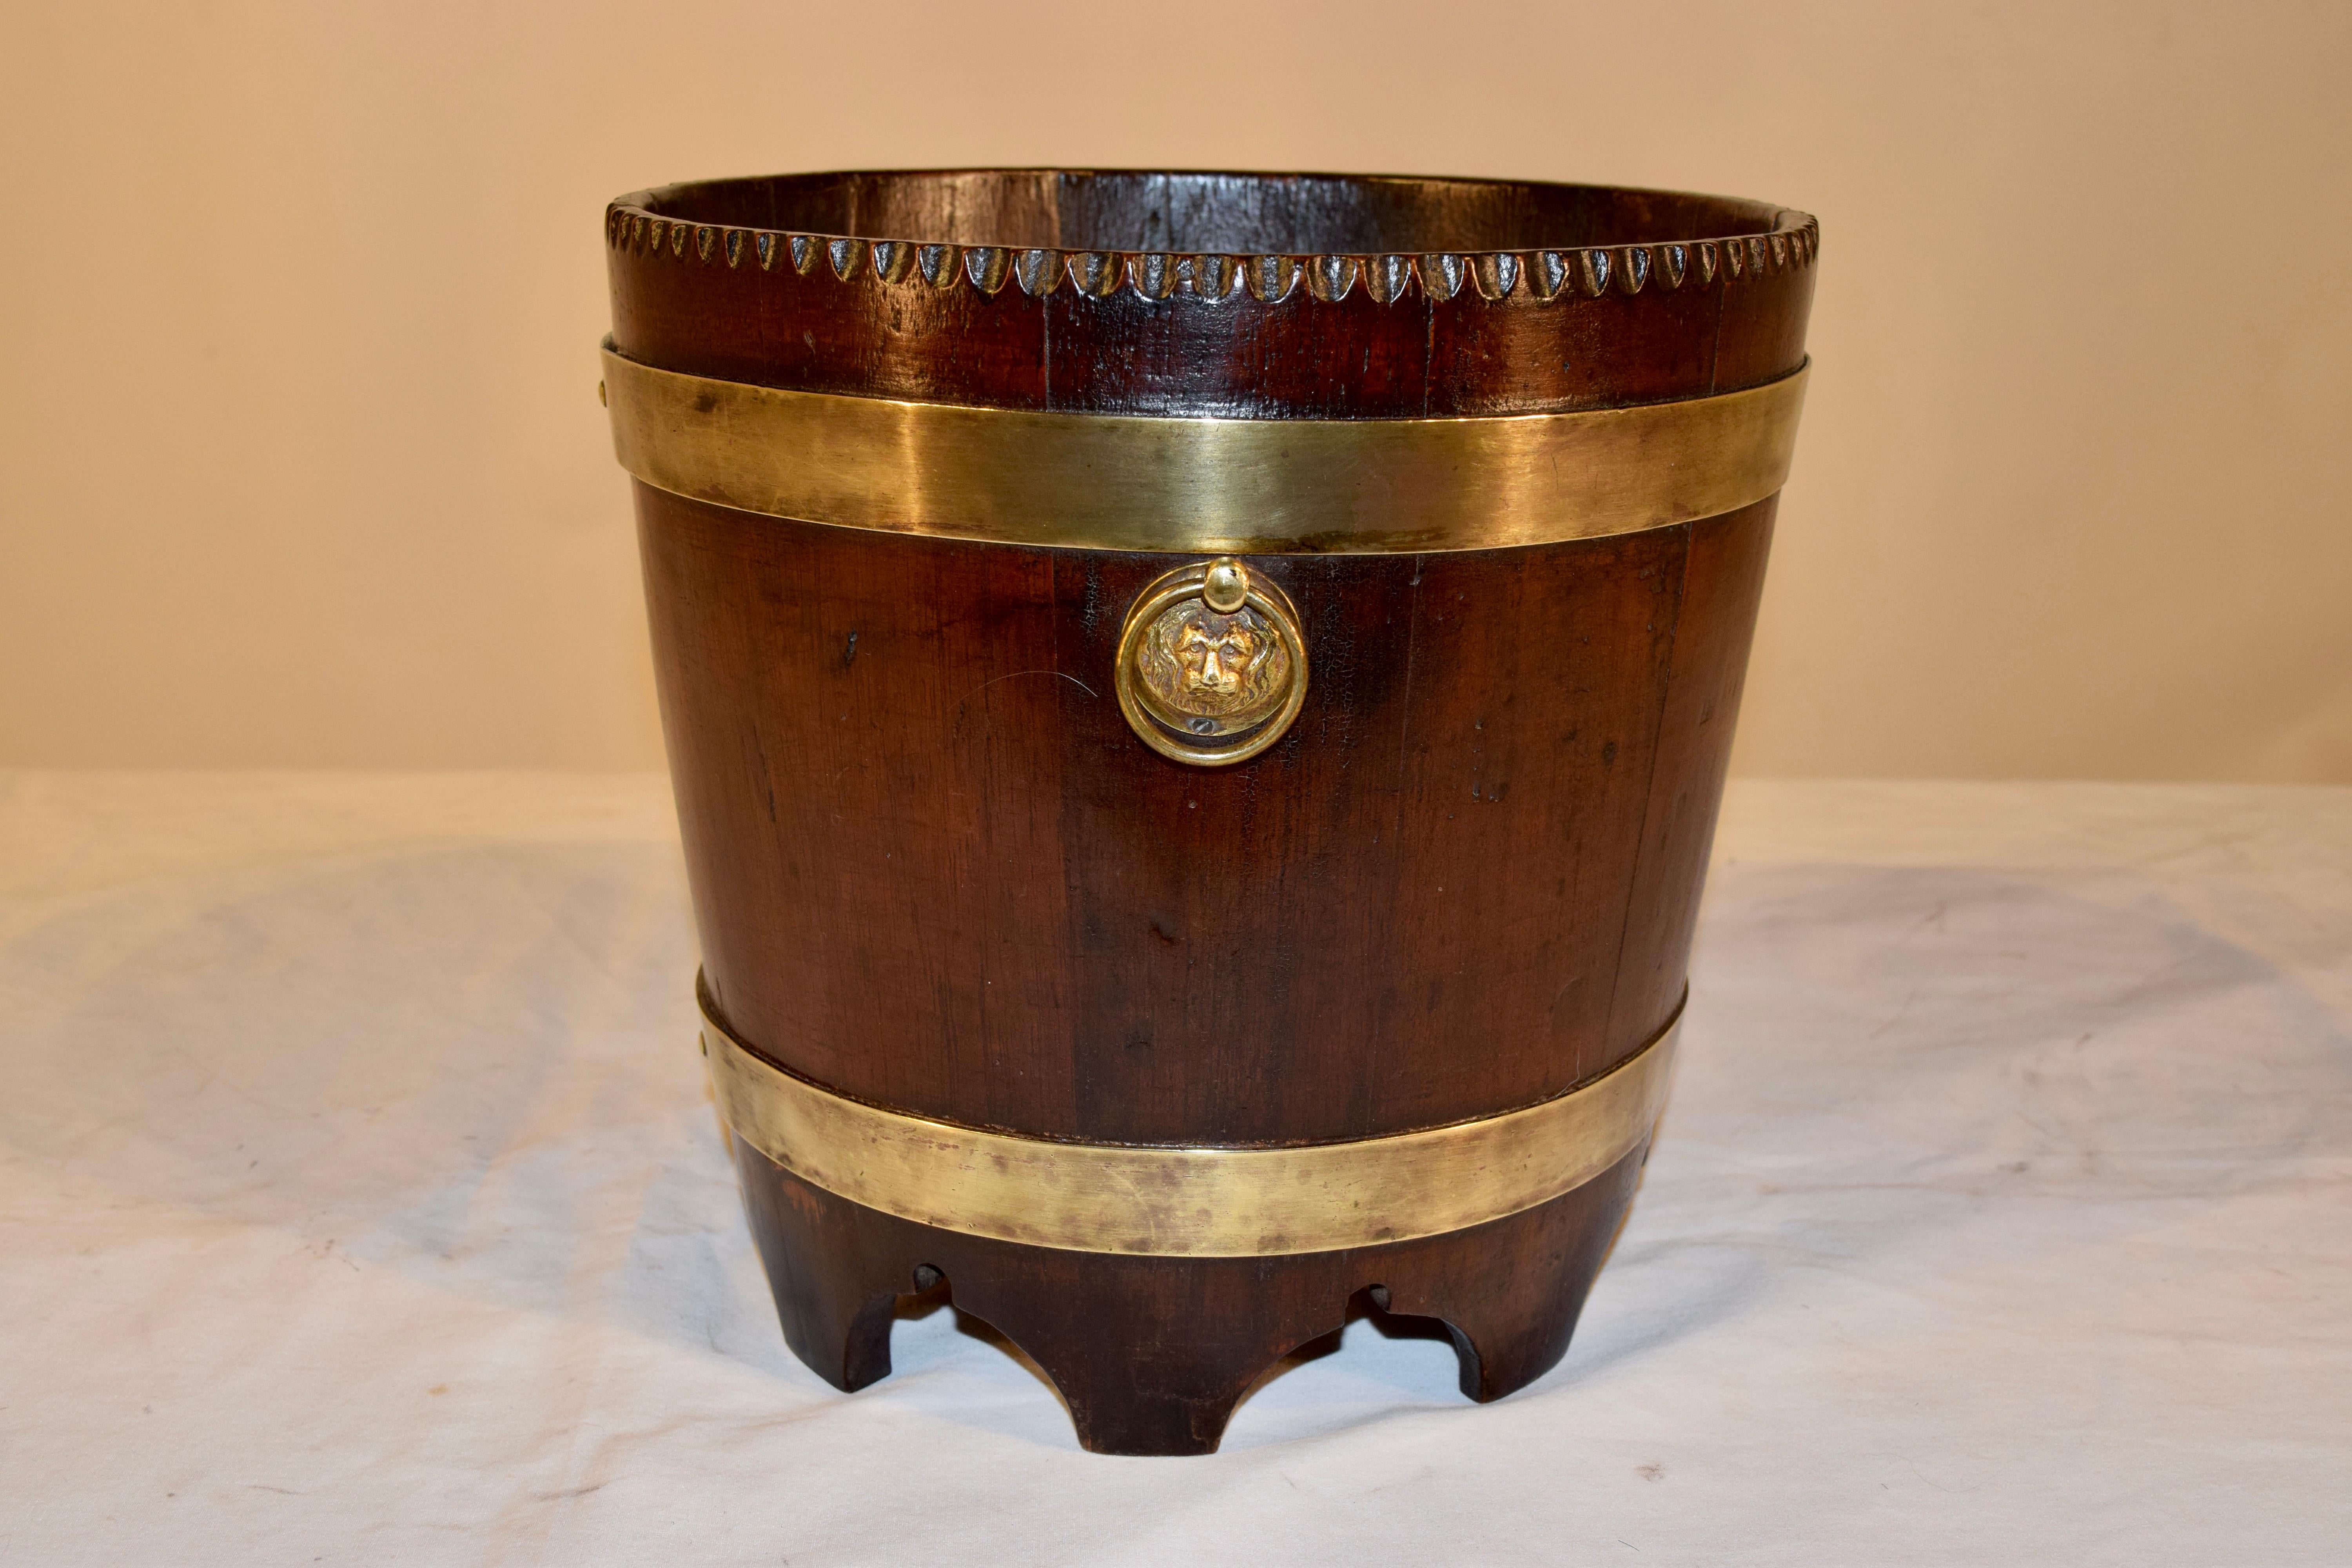 19th century English oak bucket strapped in brass banding. Lovely pie crust edge detail at the top and scalloped feet on the base.